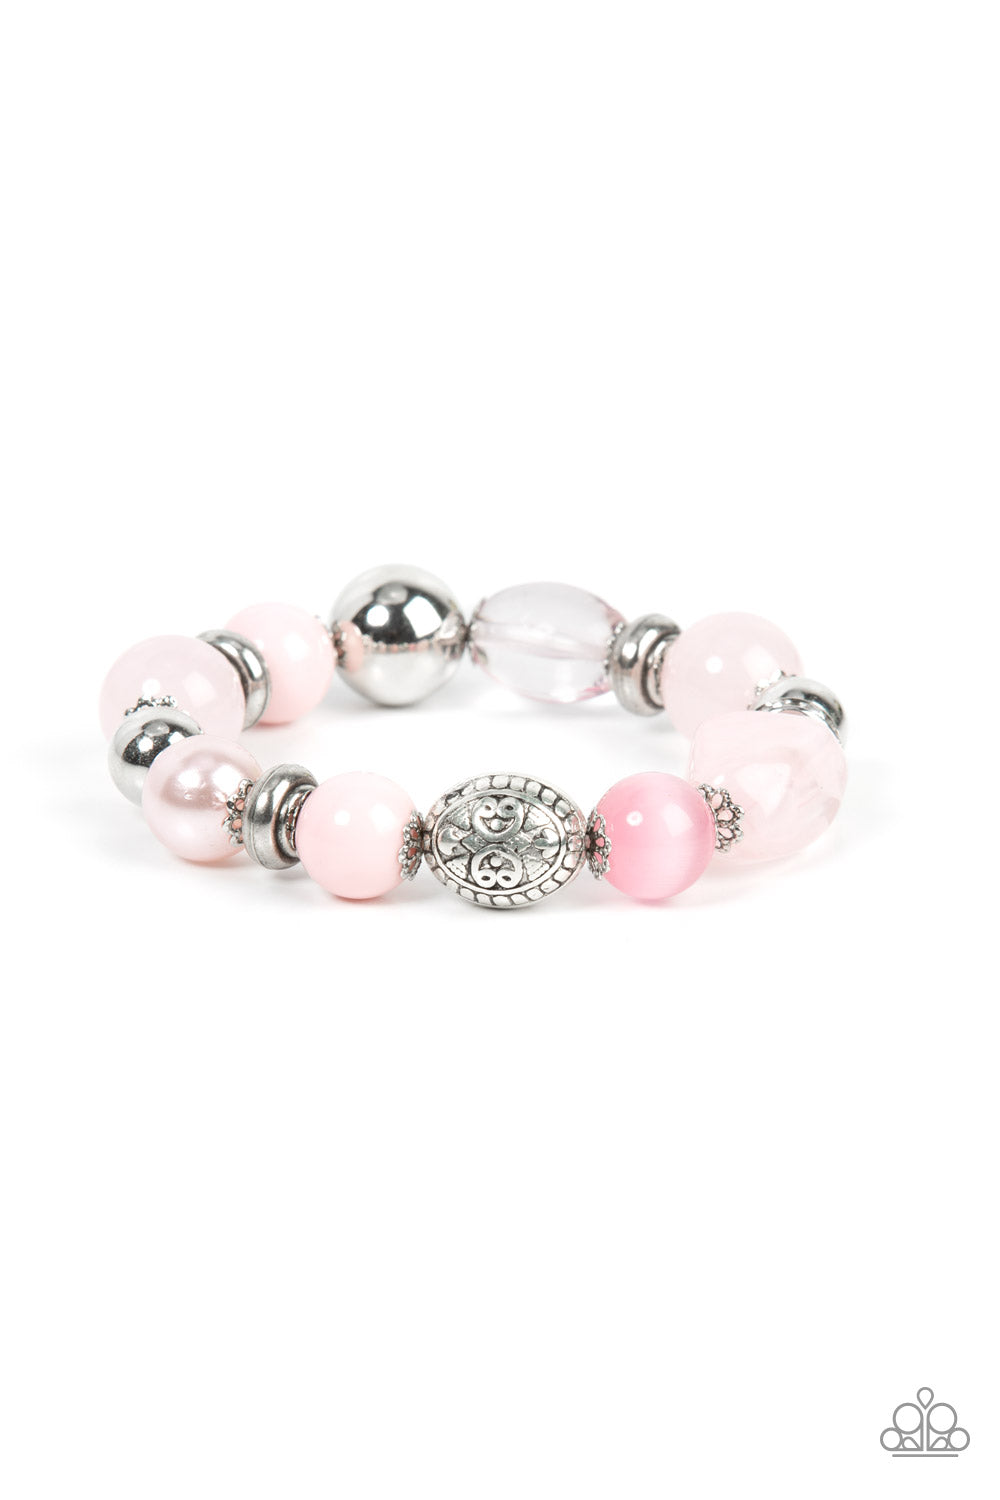 Tonal Takeover - Pink Opaque, Glassy, & Pearly Beaded paparazzi Stretch Bracelet